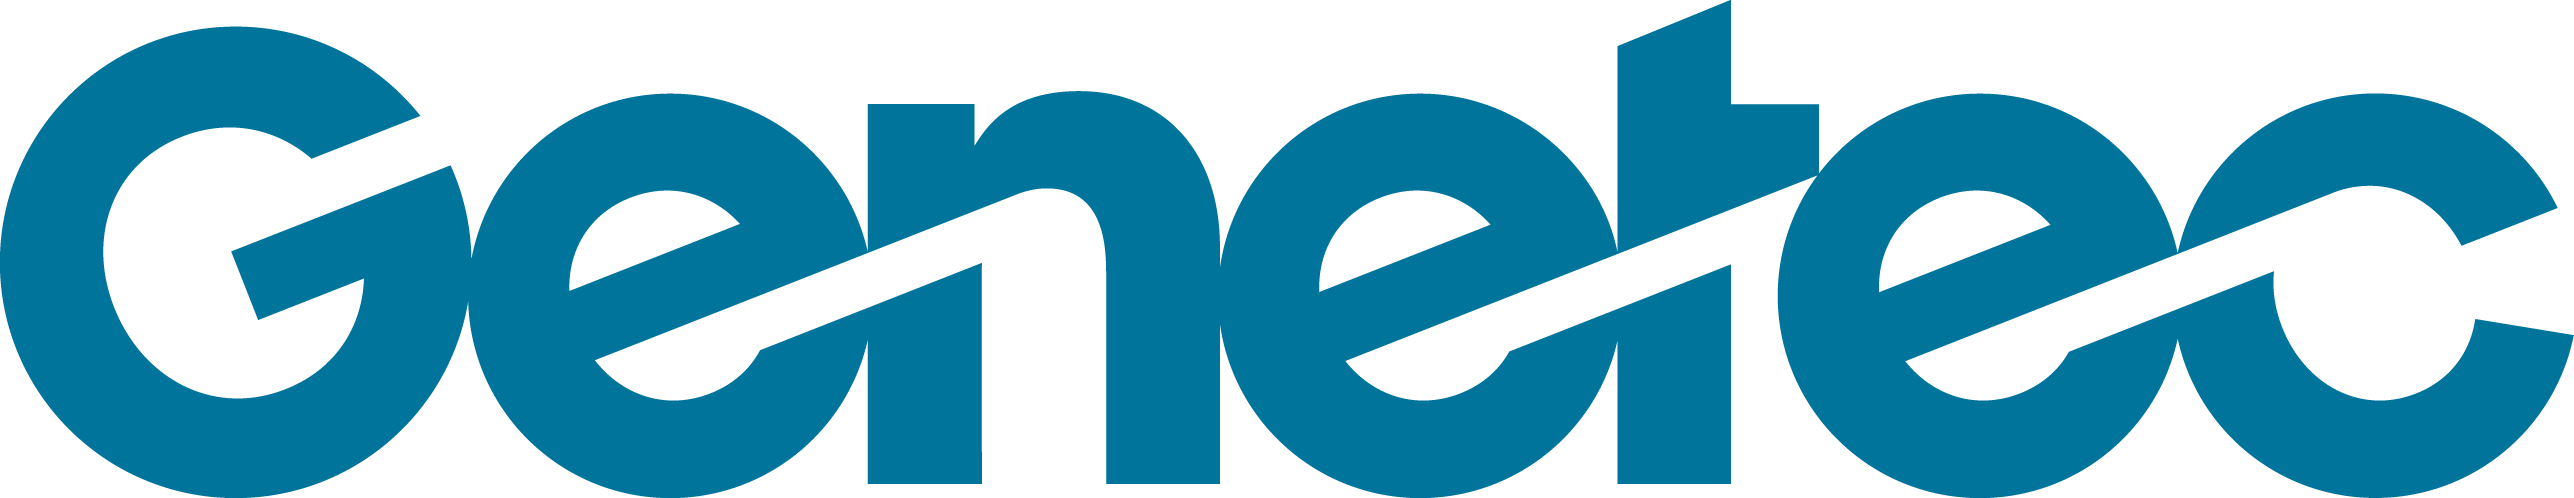 The Use Of Video To Trigger Events, Or Events To Trigger - Genetec Logo Png (2574x498)